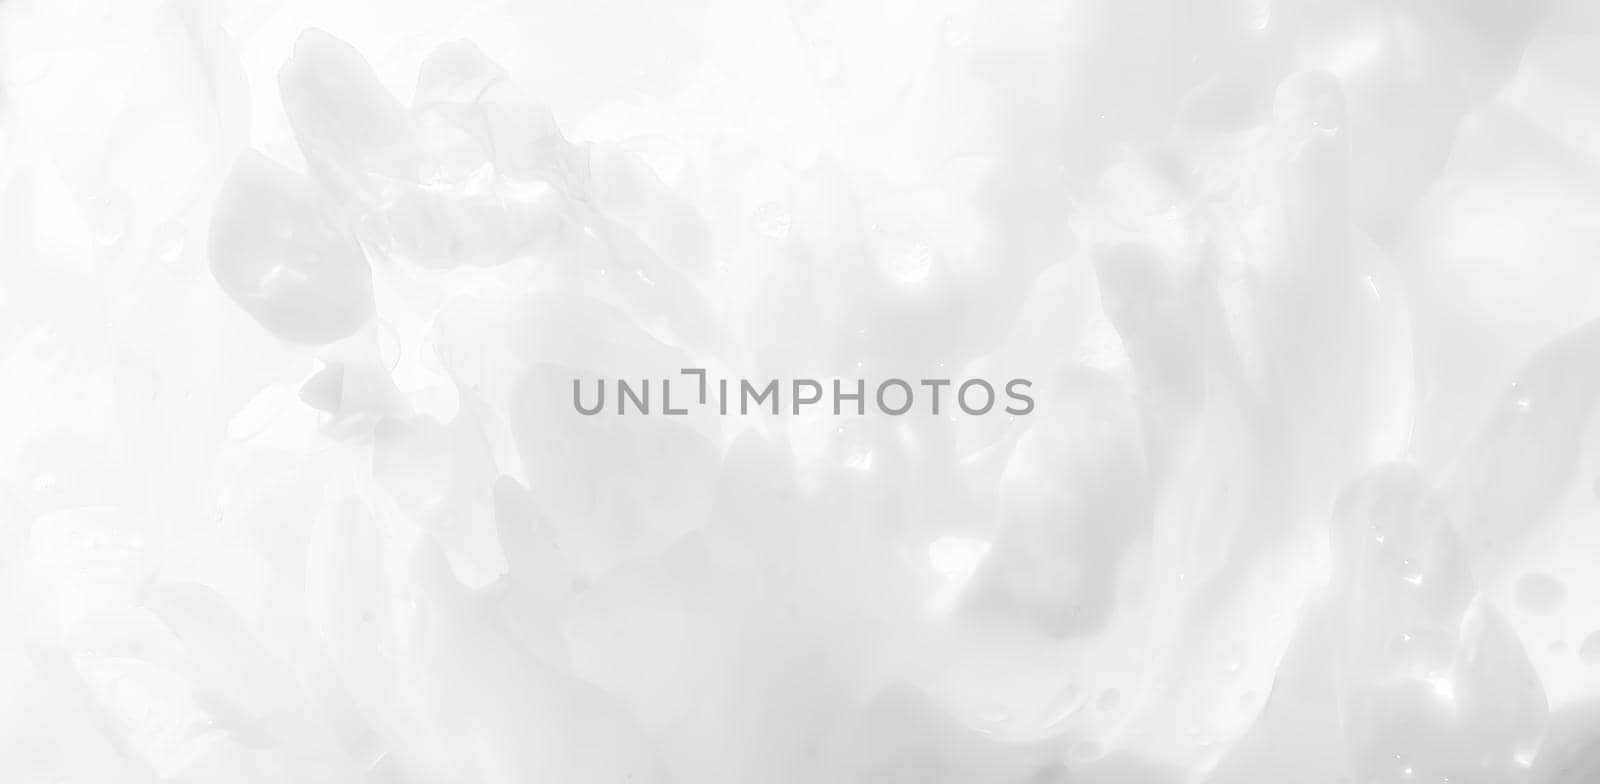 Soft focus image of blooming white peonies. Abstract floral background in light tonality